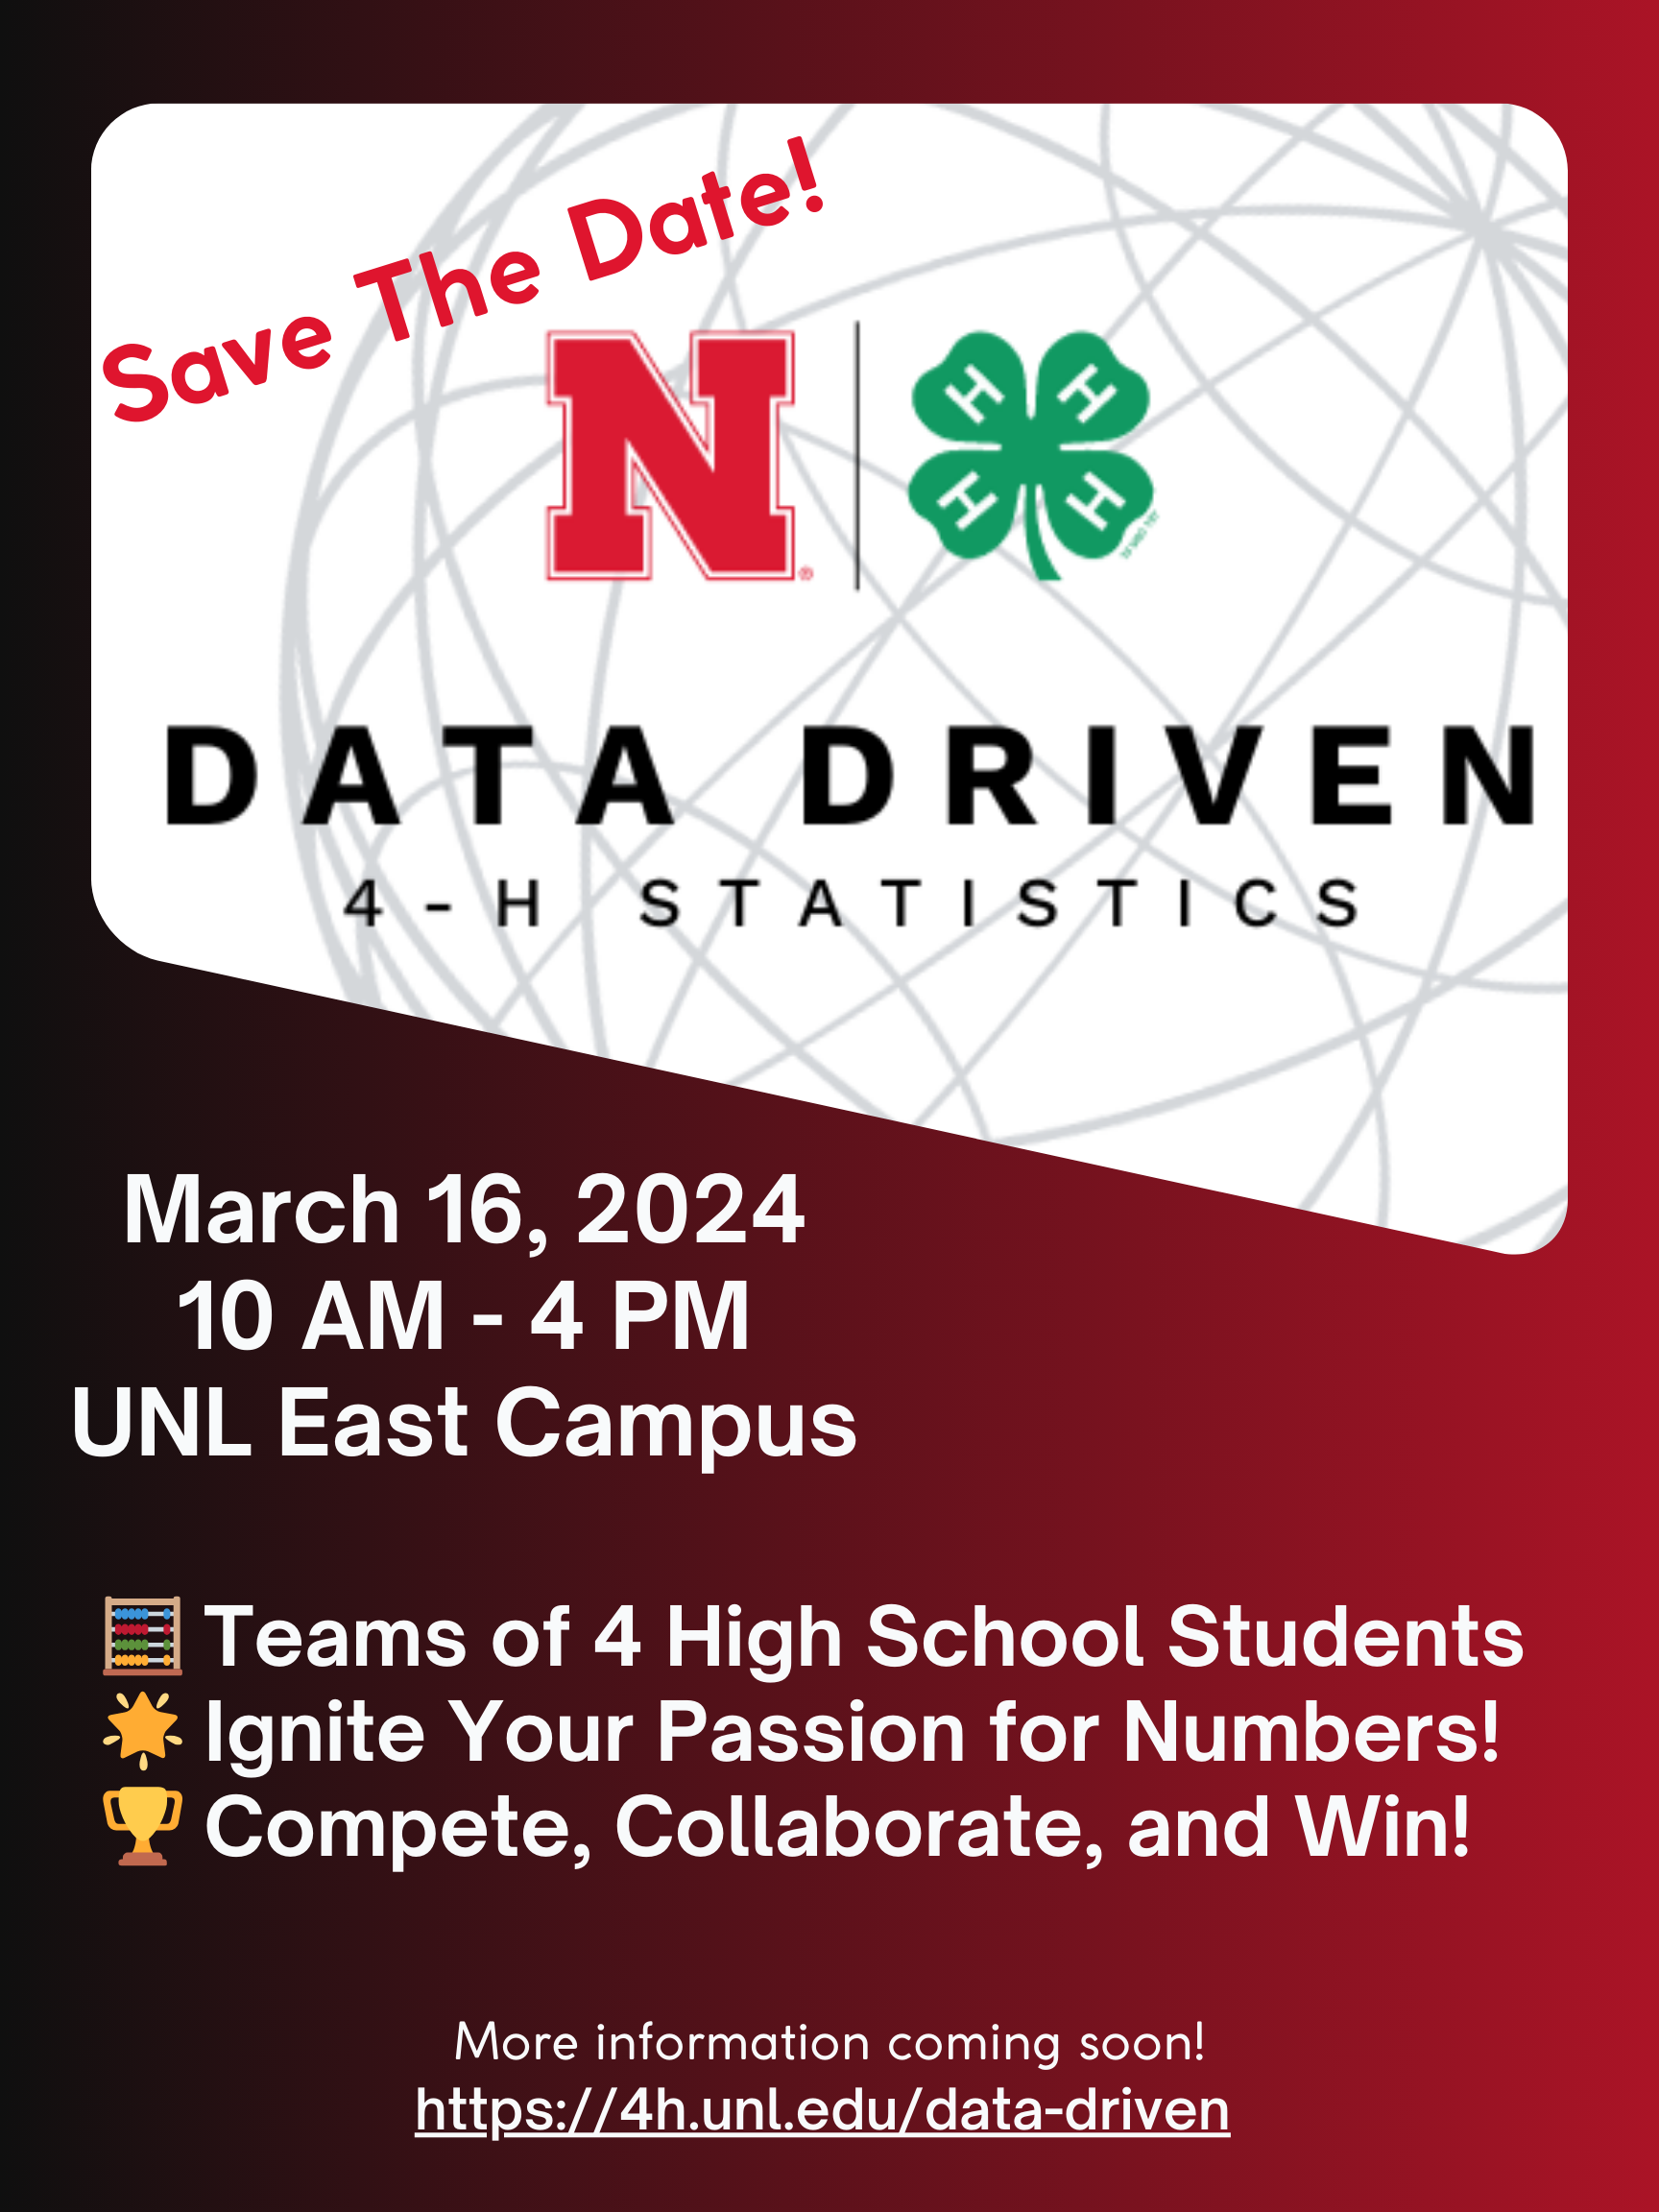 Registration Open for Data Driven Statistics Field Day at UNL for High Schoolers - March 16, 2024